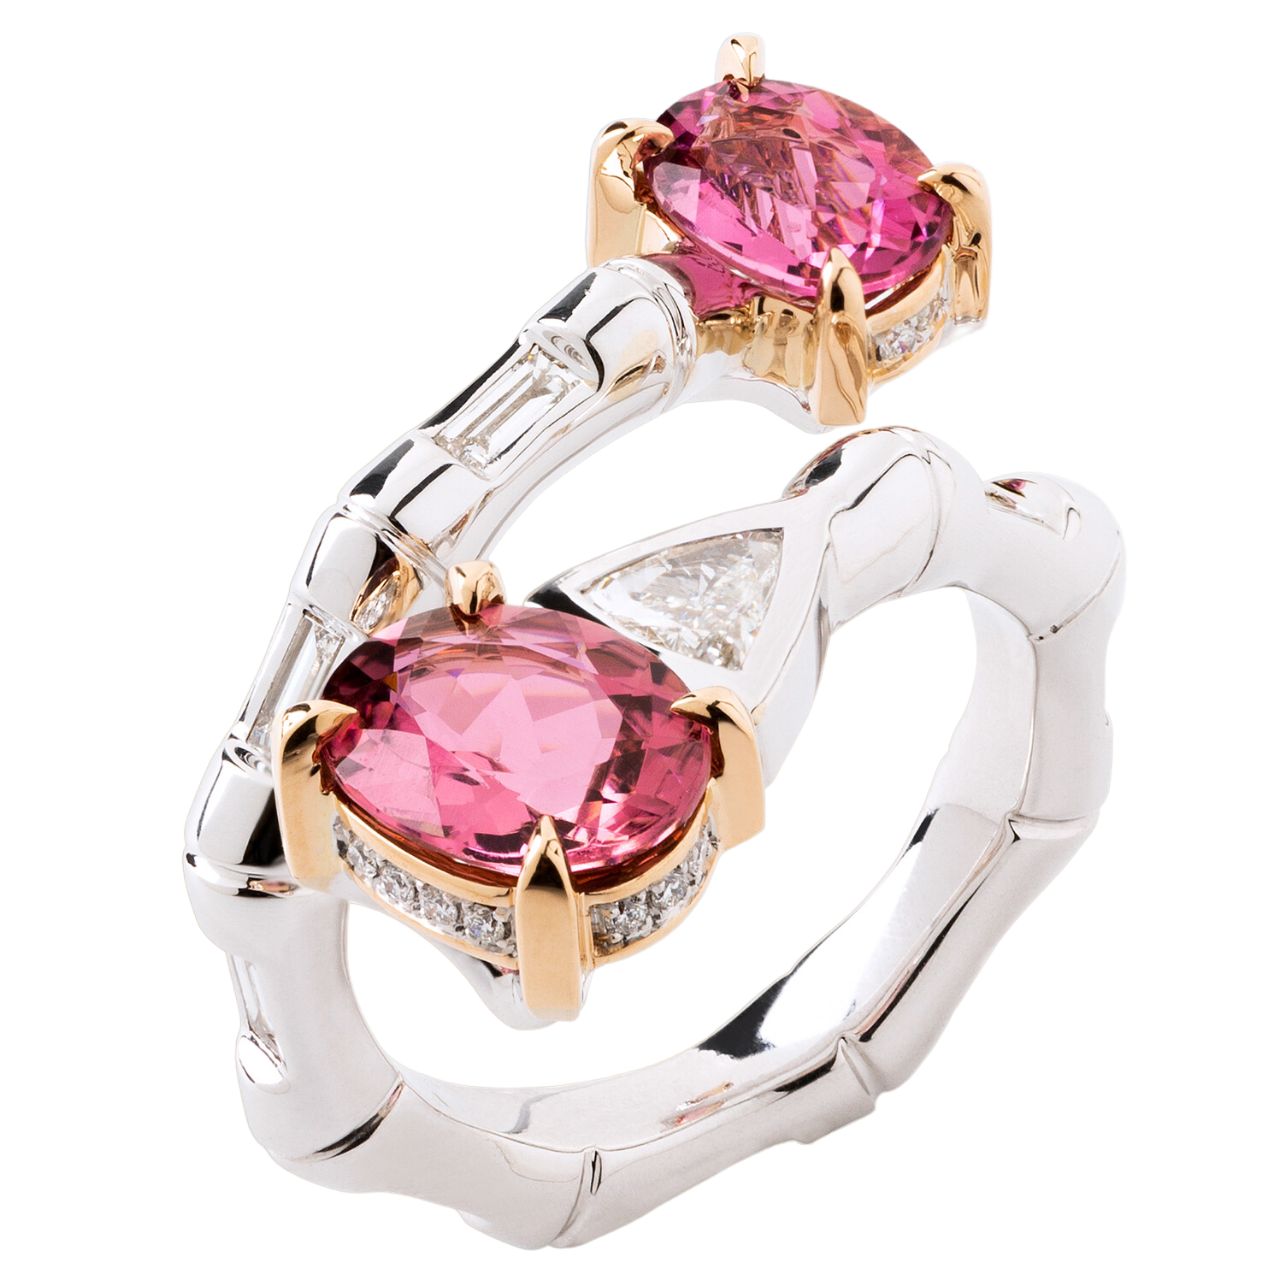 Bamboo ring in pink tourmaline set with white diamonds.